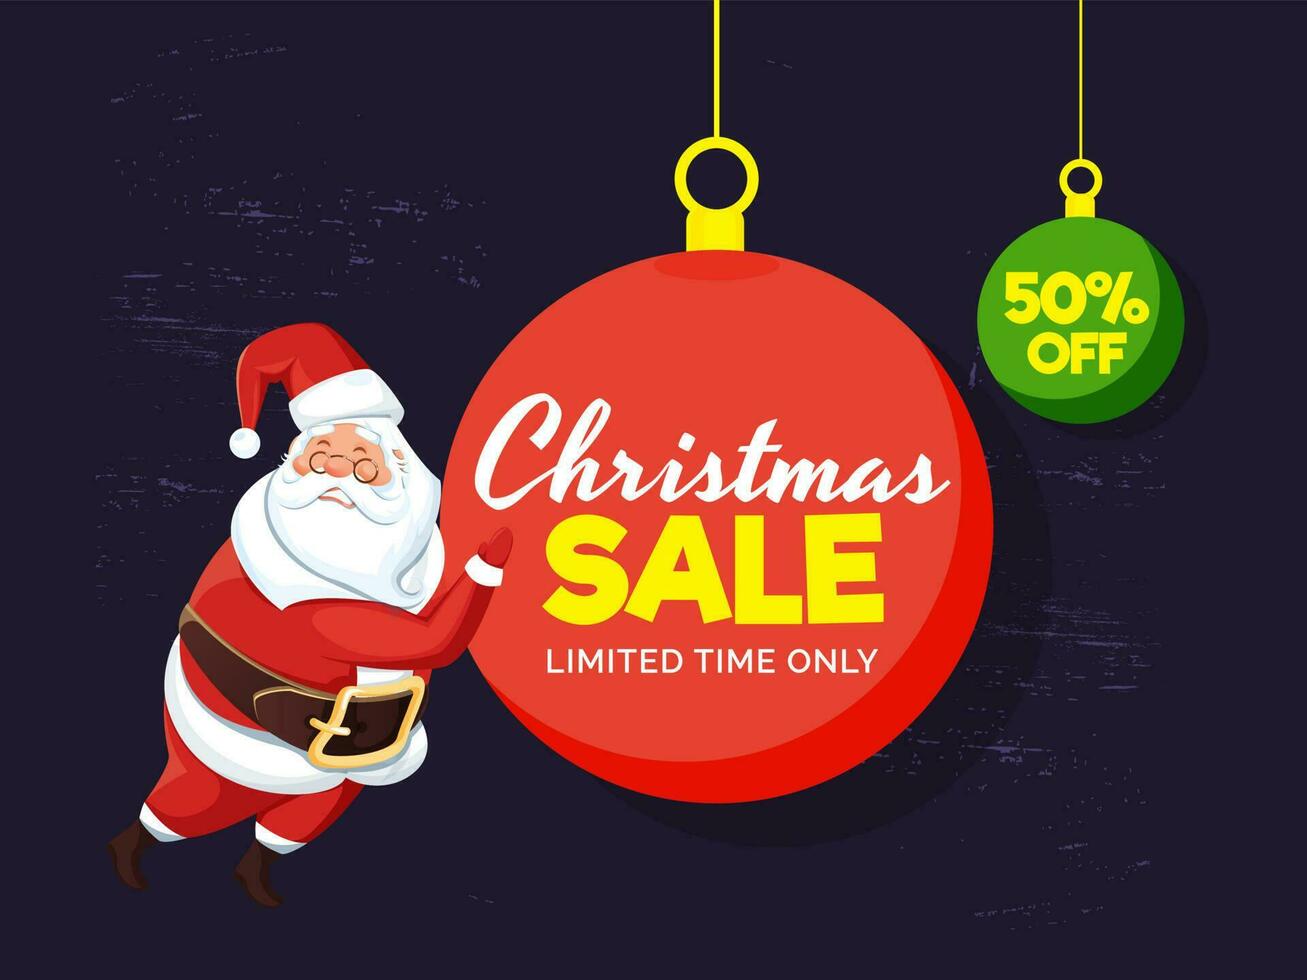 Christmas Sale tag, label or poster design with discount offer and santa claus illustration on purple background. vector